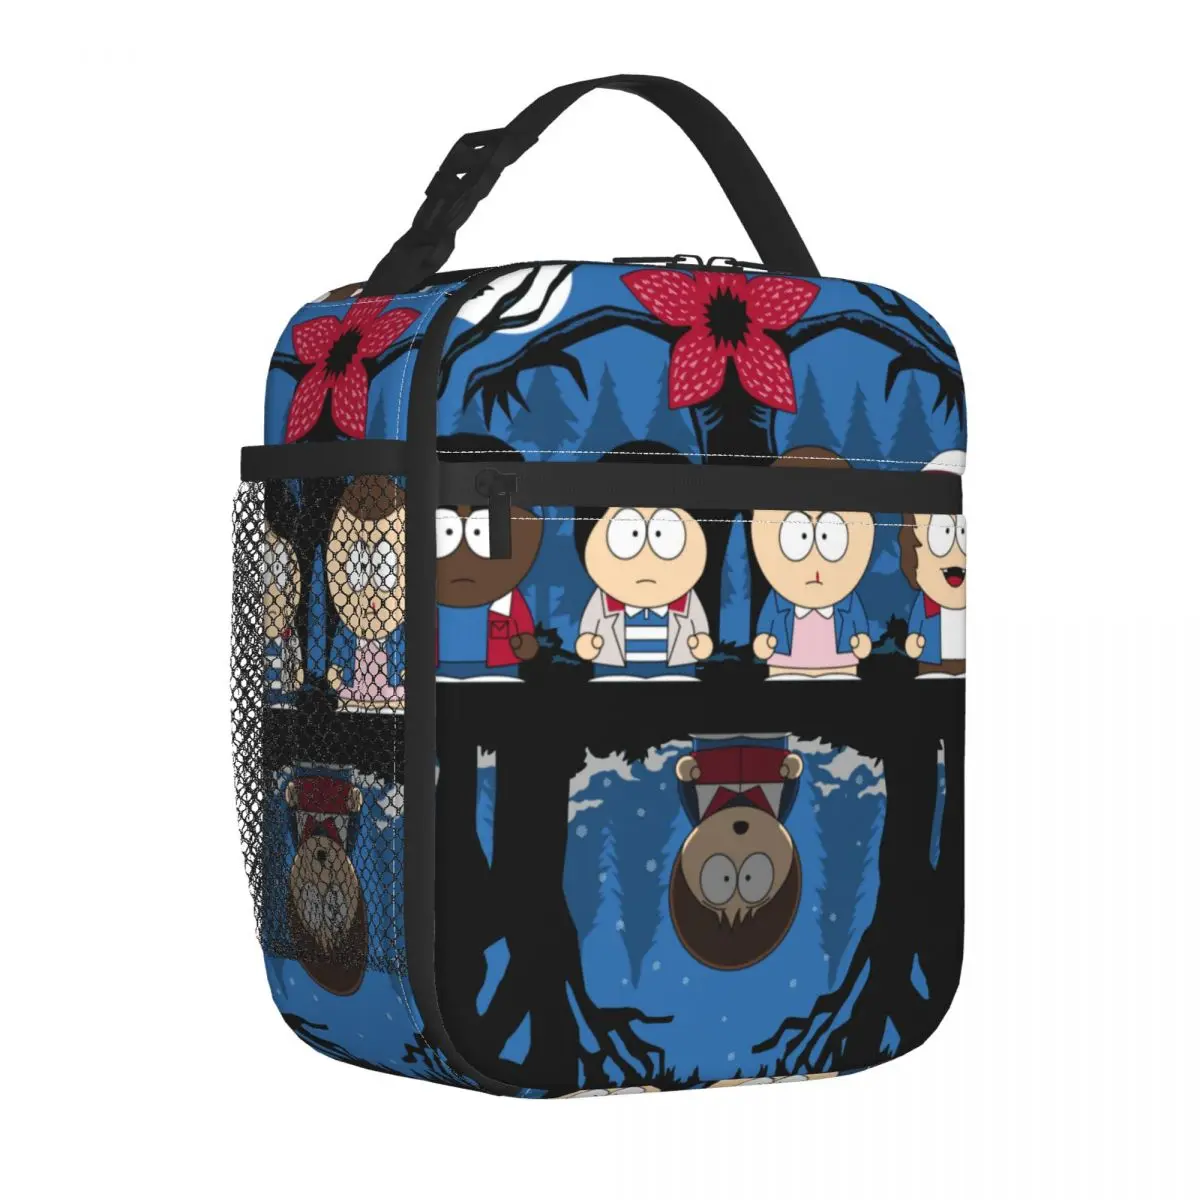 

Stranger SouthPark Insulated Lunch Bags Leakproof Meal Container Cooler Bag Tote Lunch Box College Outdoor Bento Pouch